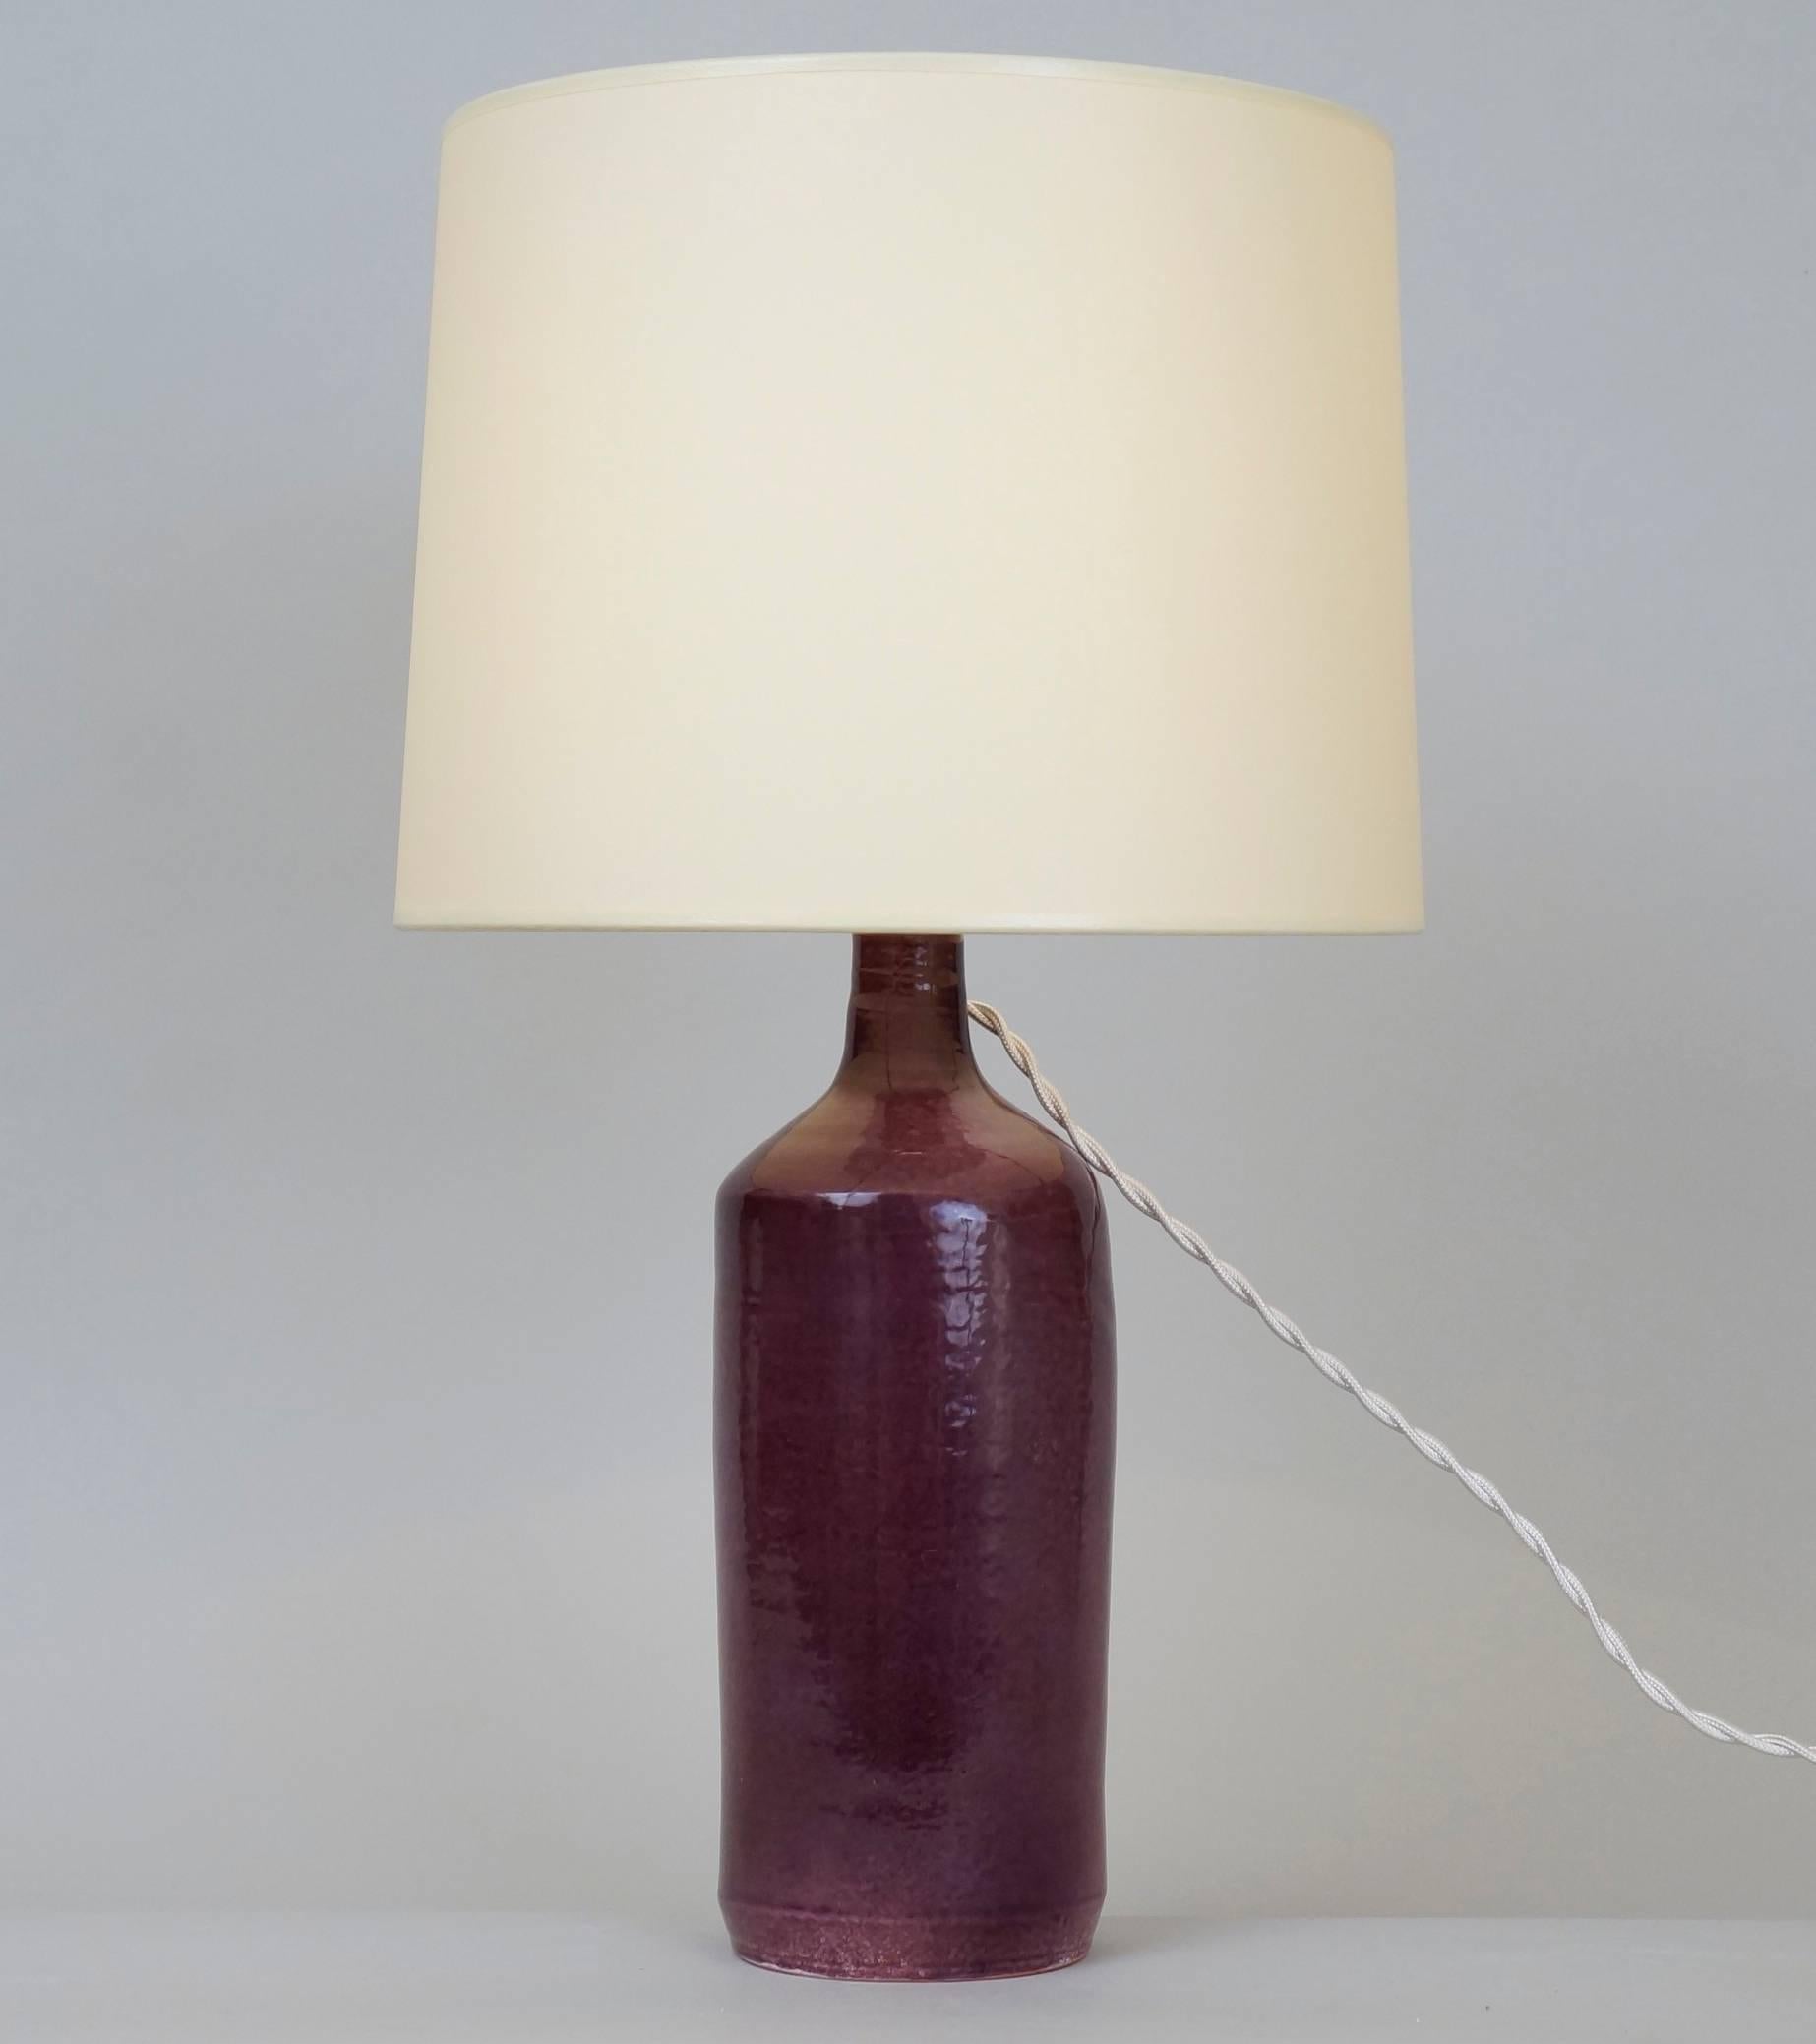 Red purple ceramic table lamp.
Custom-made fabric lampshade.
Rewired with twisted silk cord.
US standard plug on request.
Ceramic body height: 24 cm - 9.5 in.
Height with lampshade: 43 cm - 16.9 in.
 